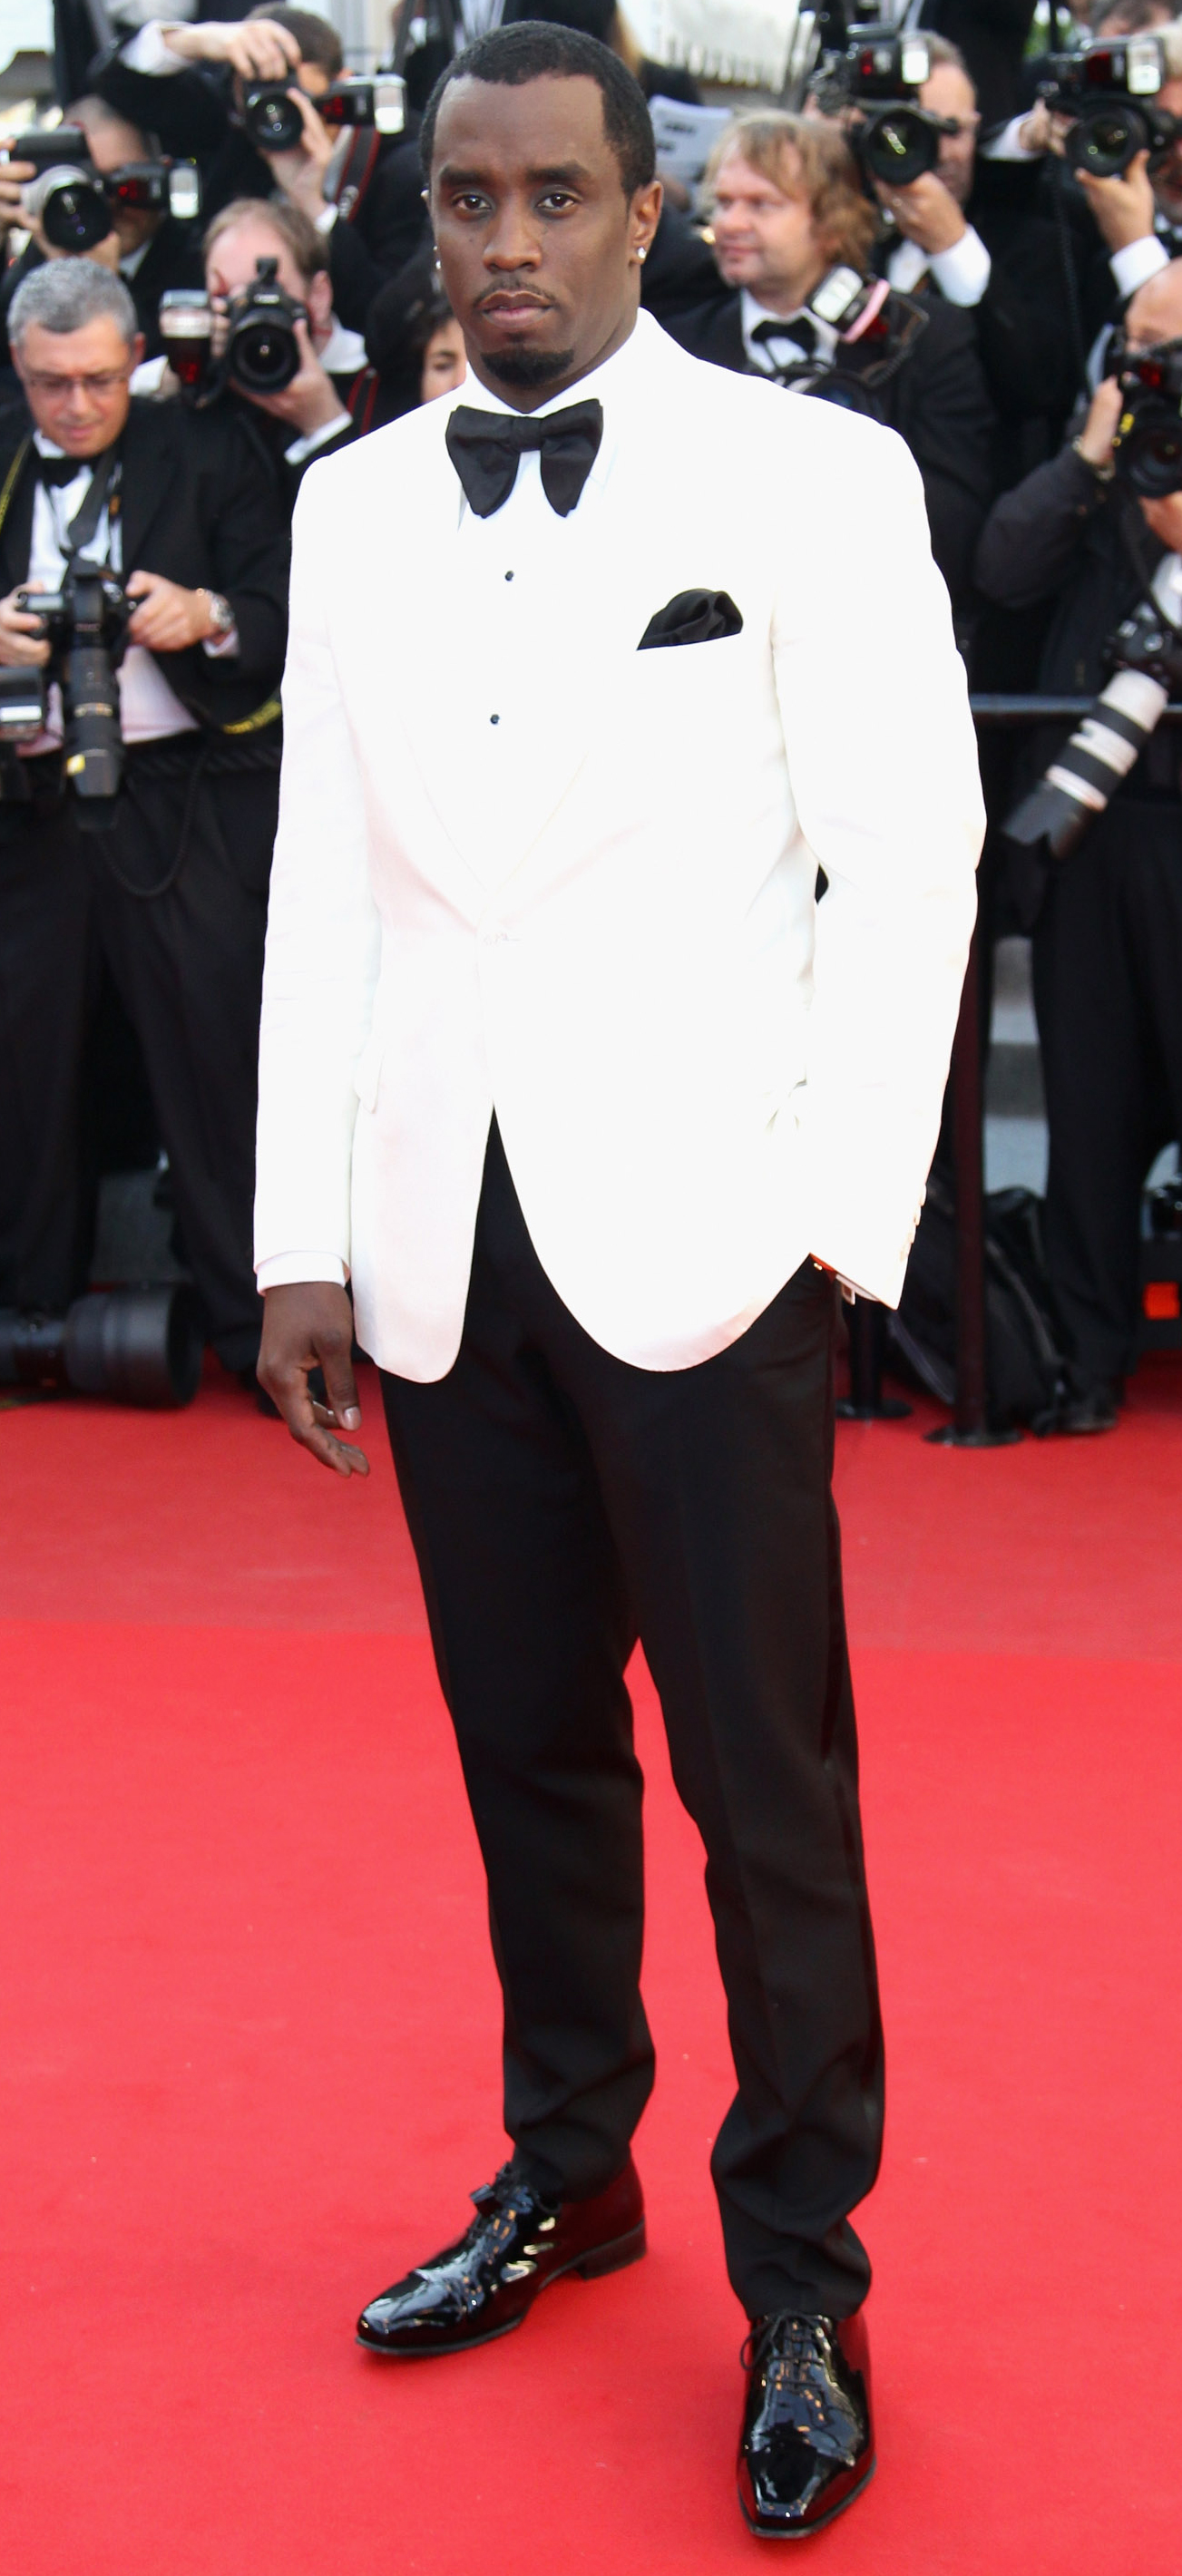 P.Diddy in tuxedo